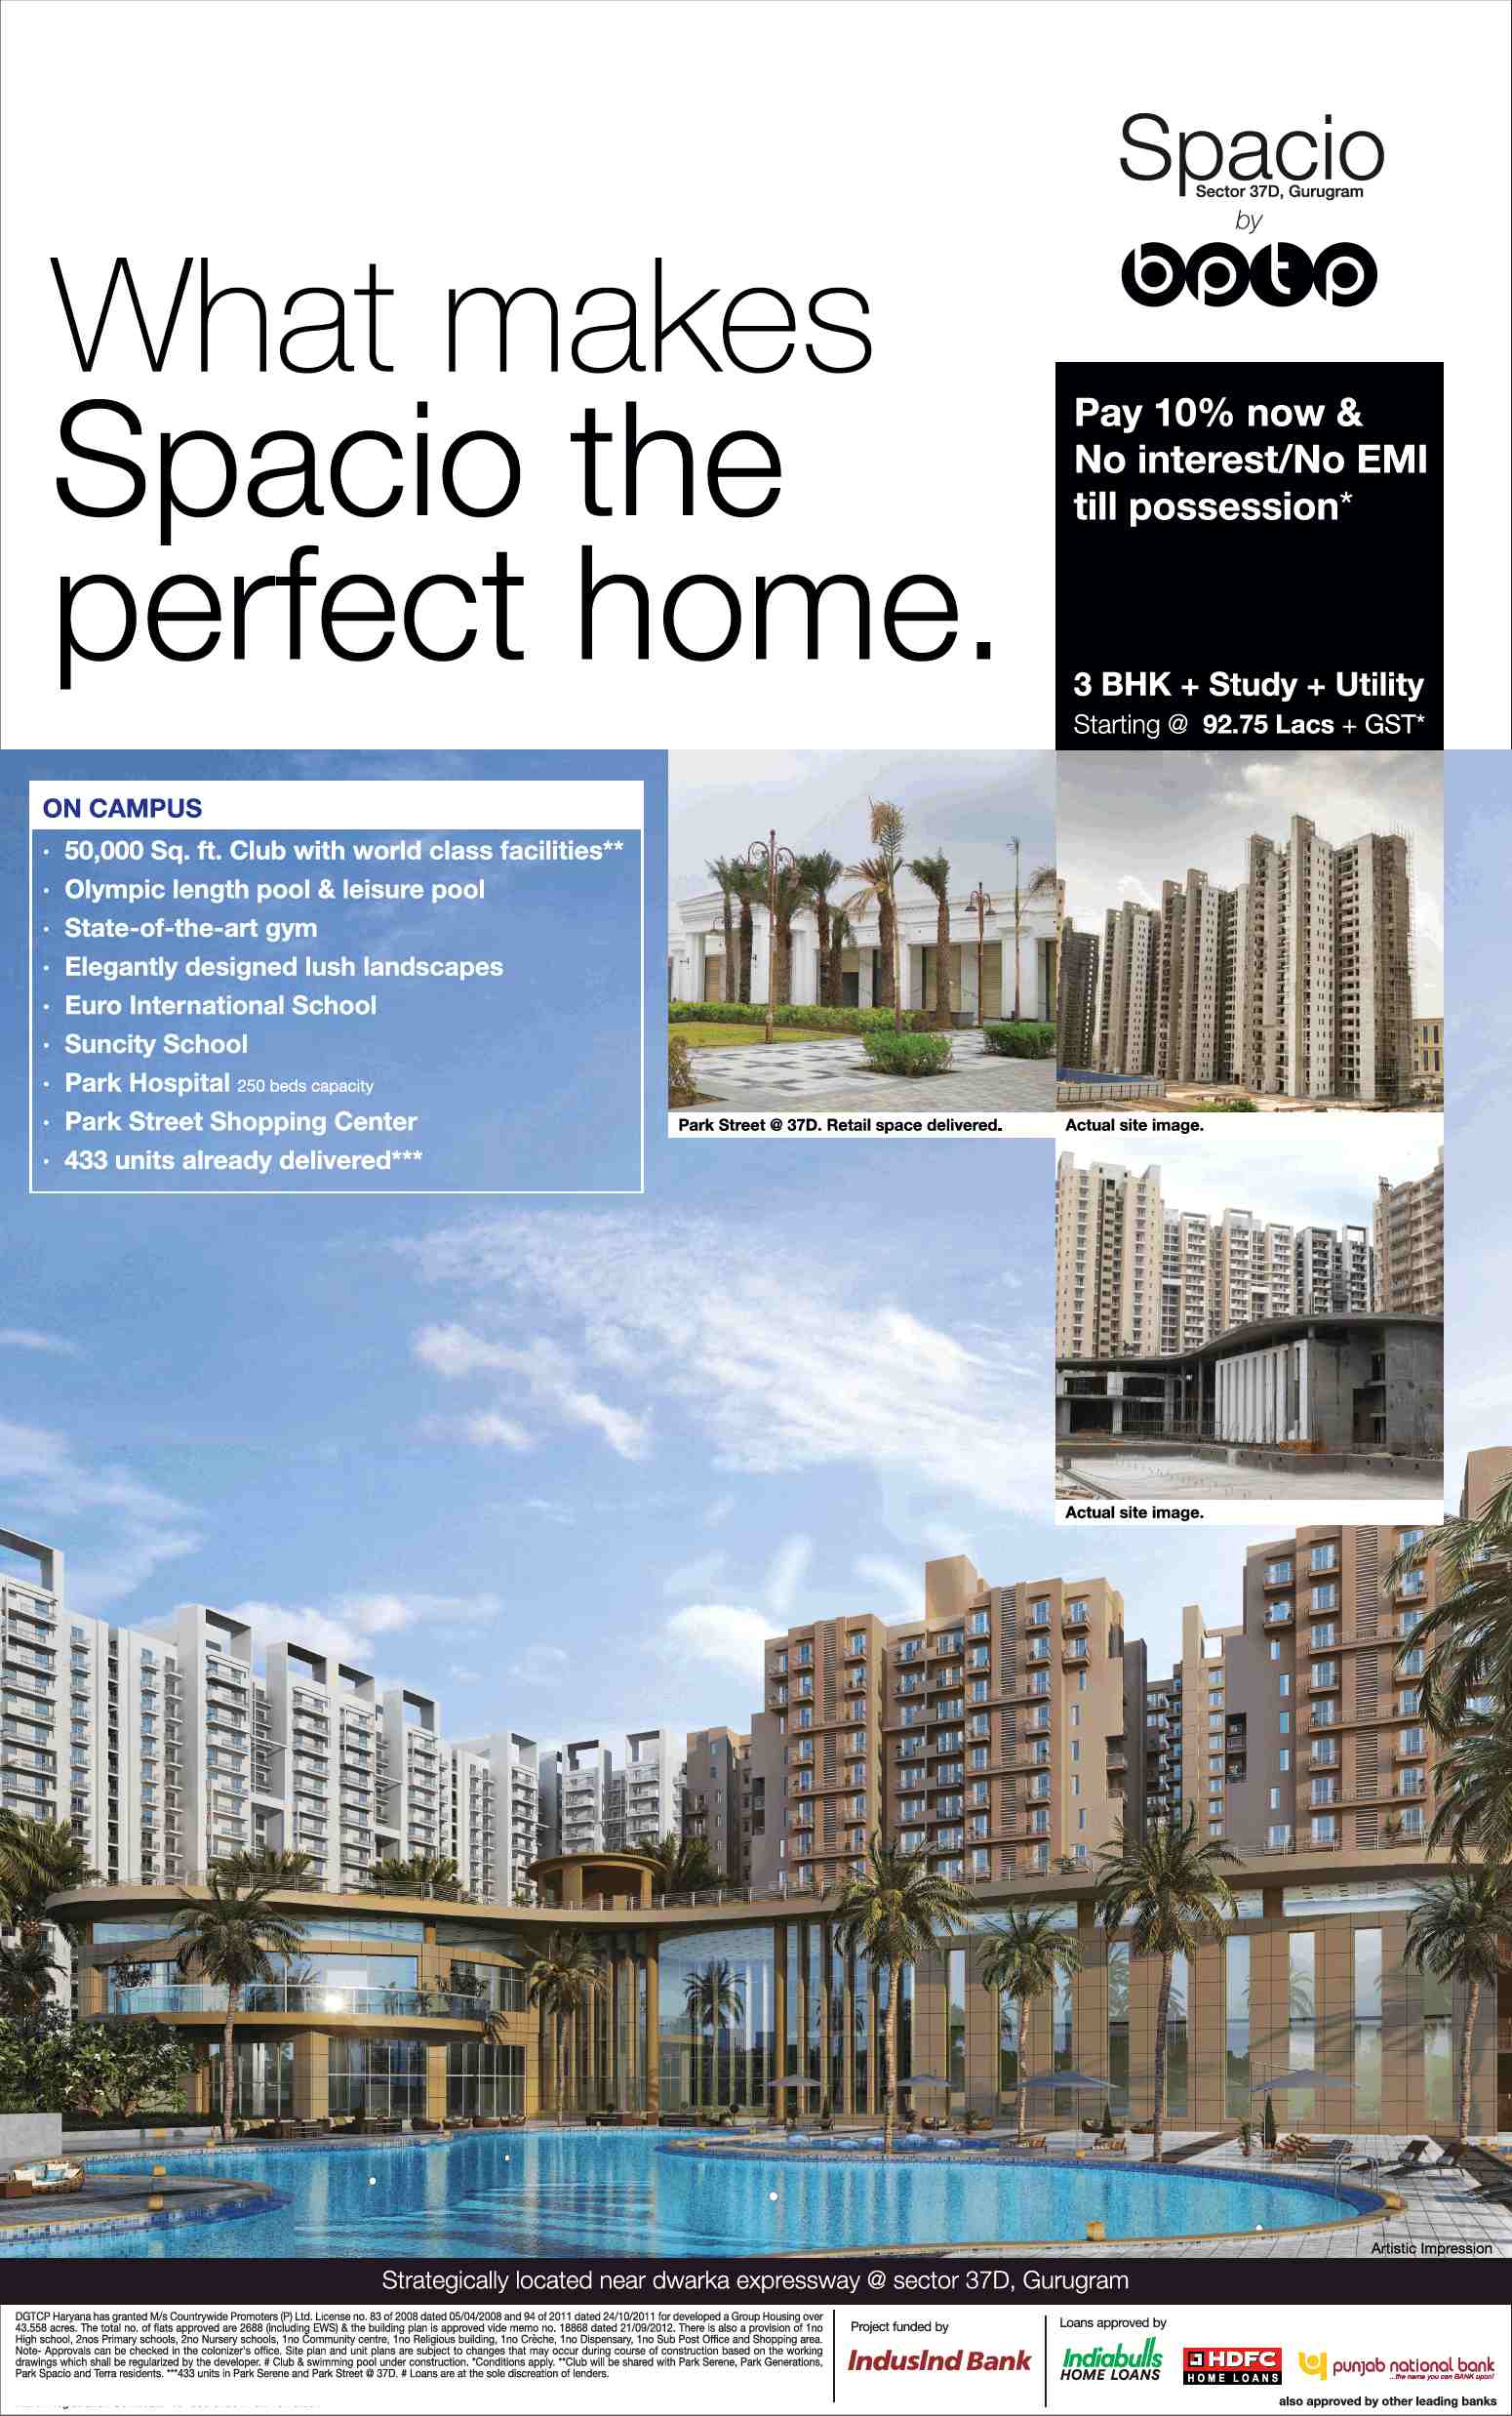 Pay 10% now and no interest & EMI till possession at BPTP Spacio in Gurgaon Update